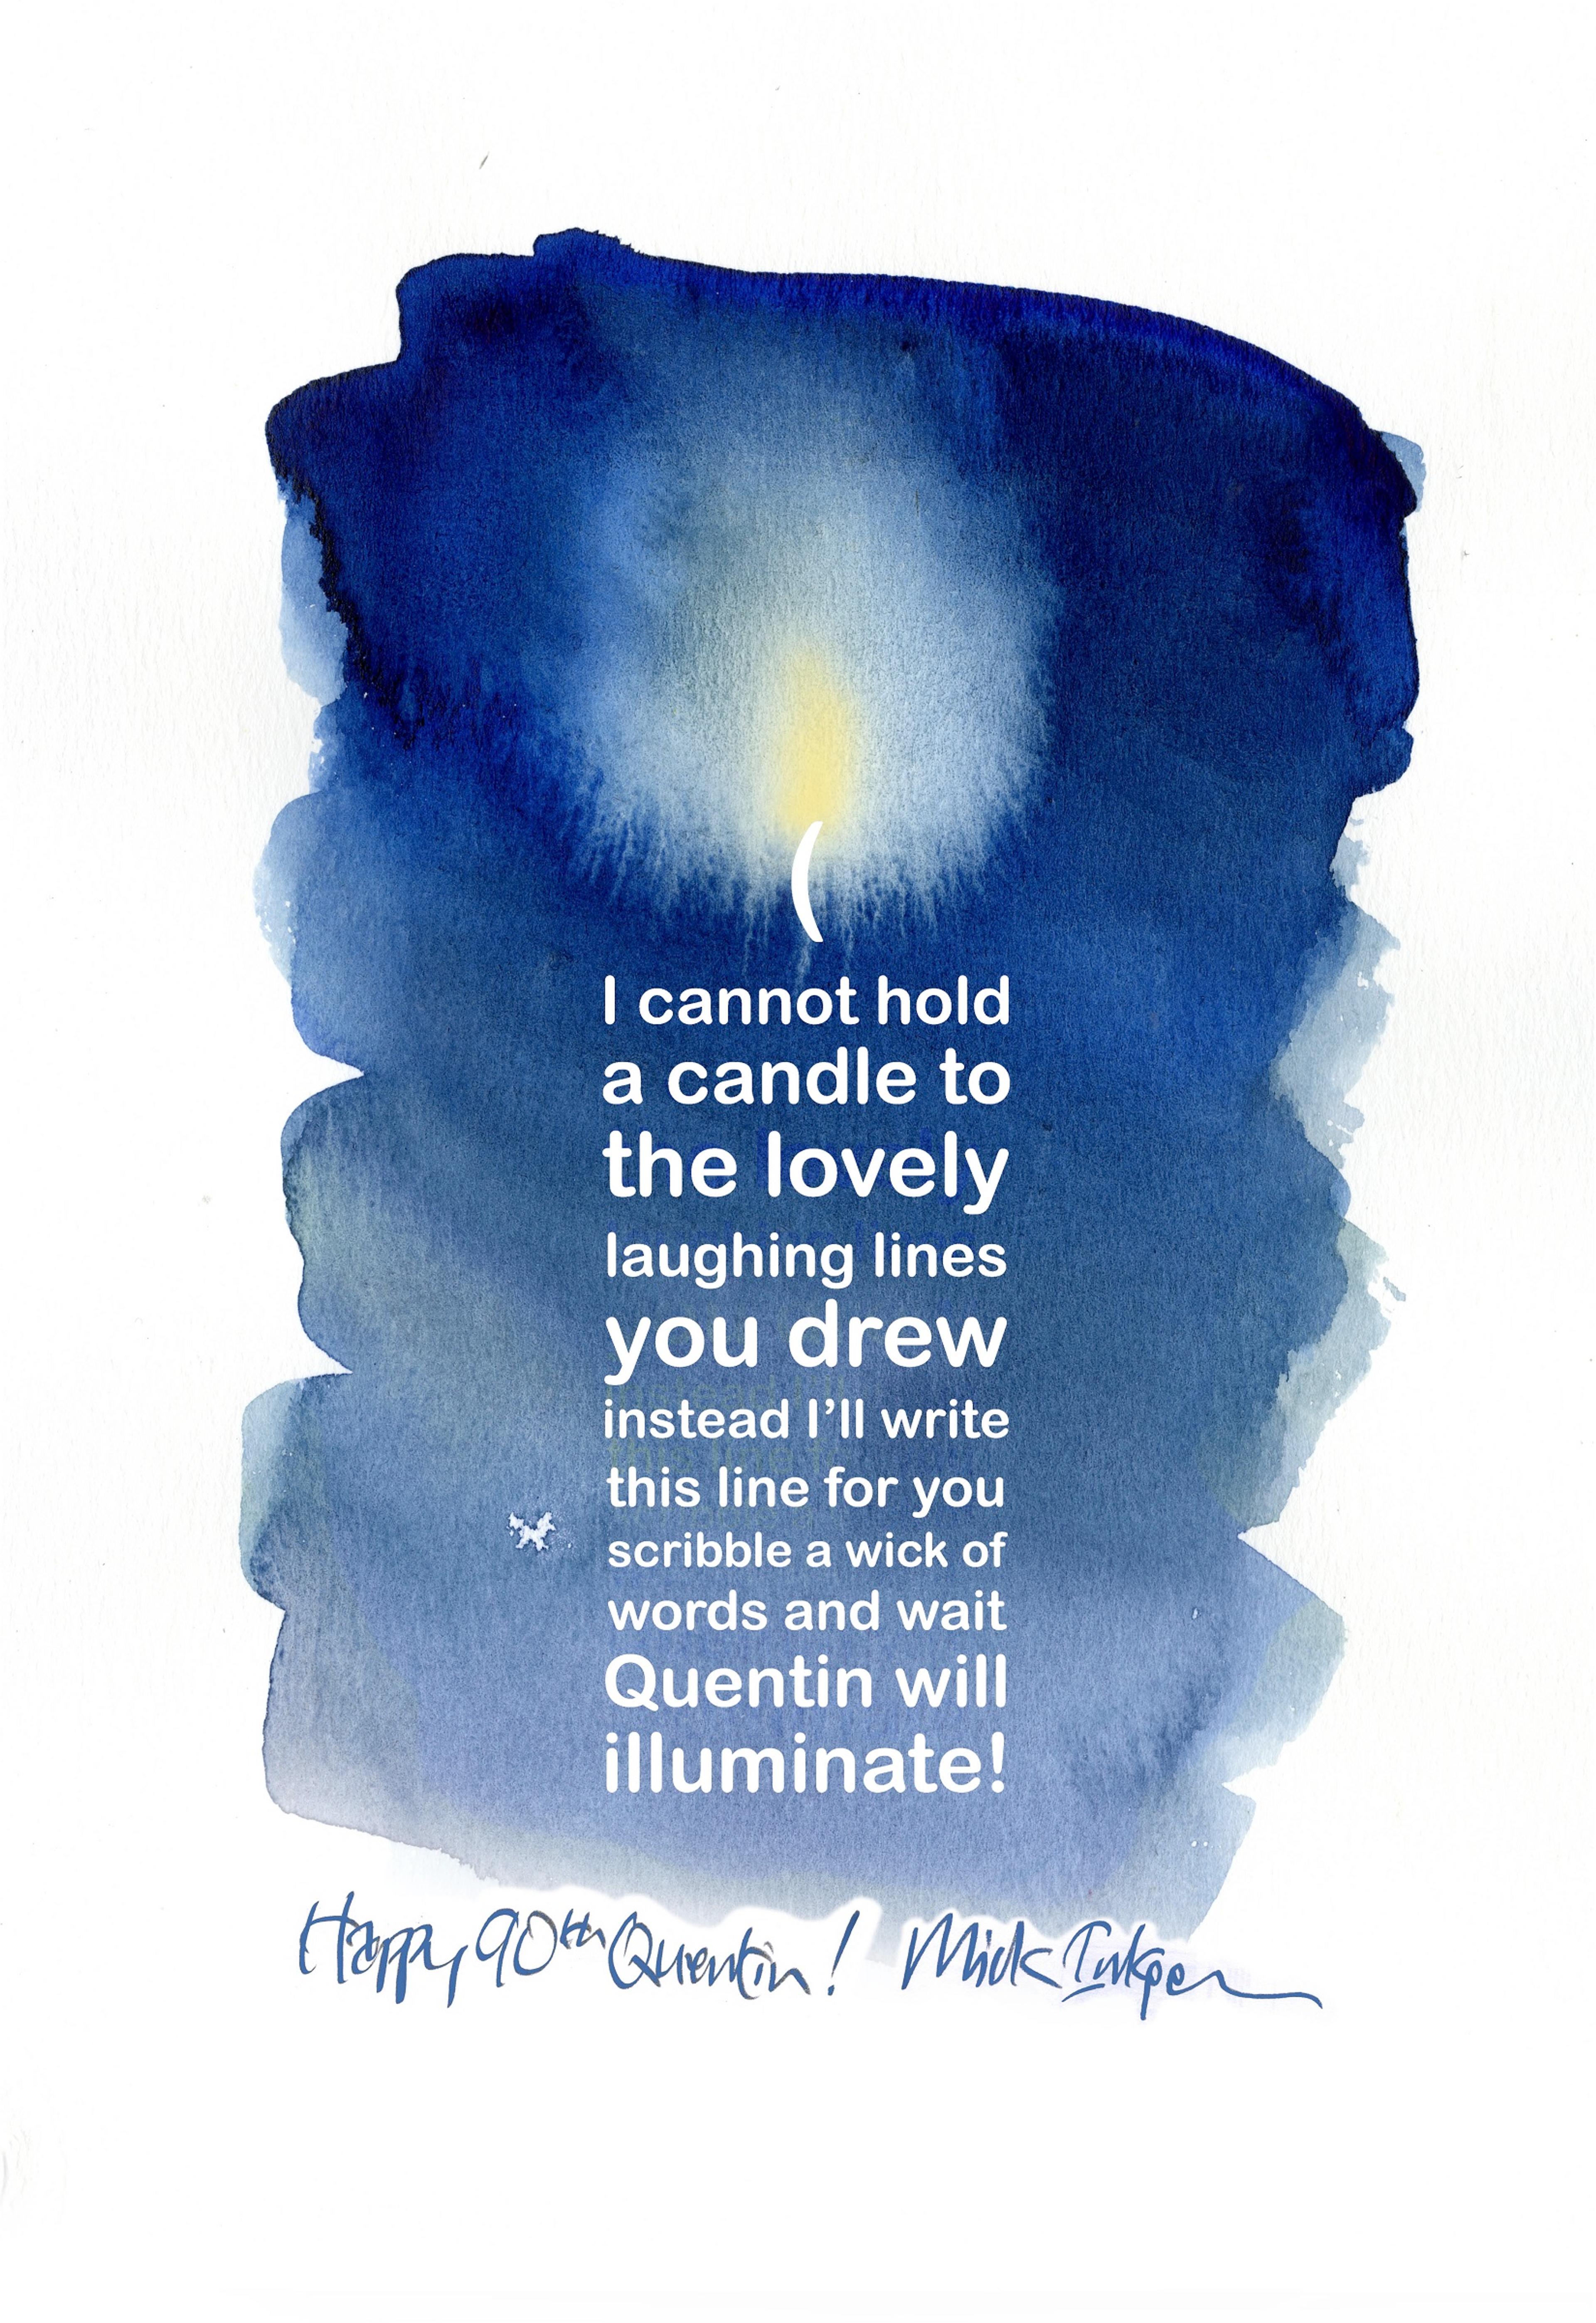 An illustration of a blue candle overlaid with the words: I cannot hold a candle to the laughing lines you drew, instead I'll write this line for you scribble a wick of words and wait Quentin will illuminate